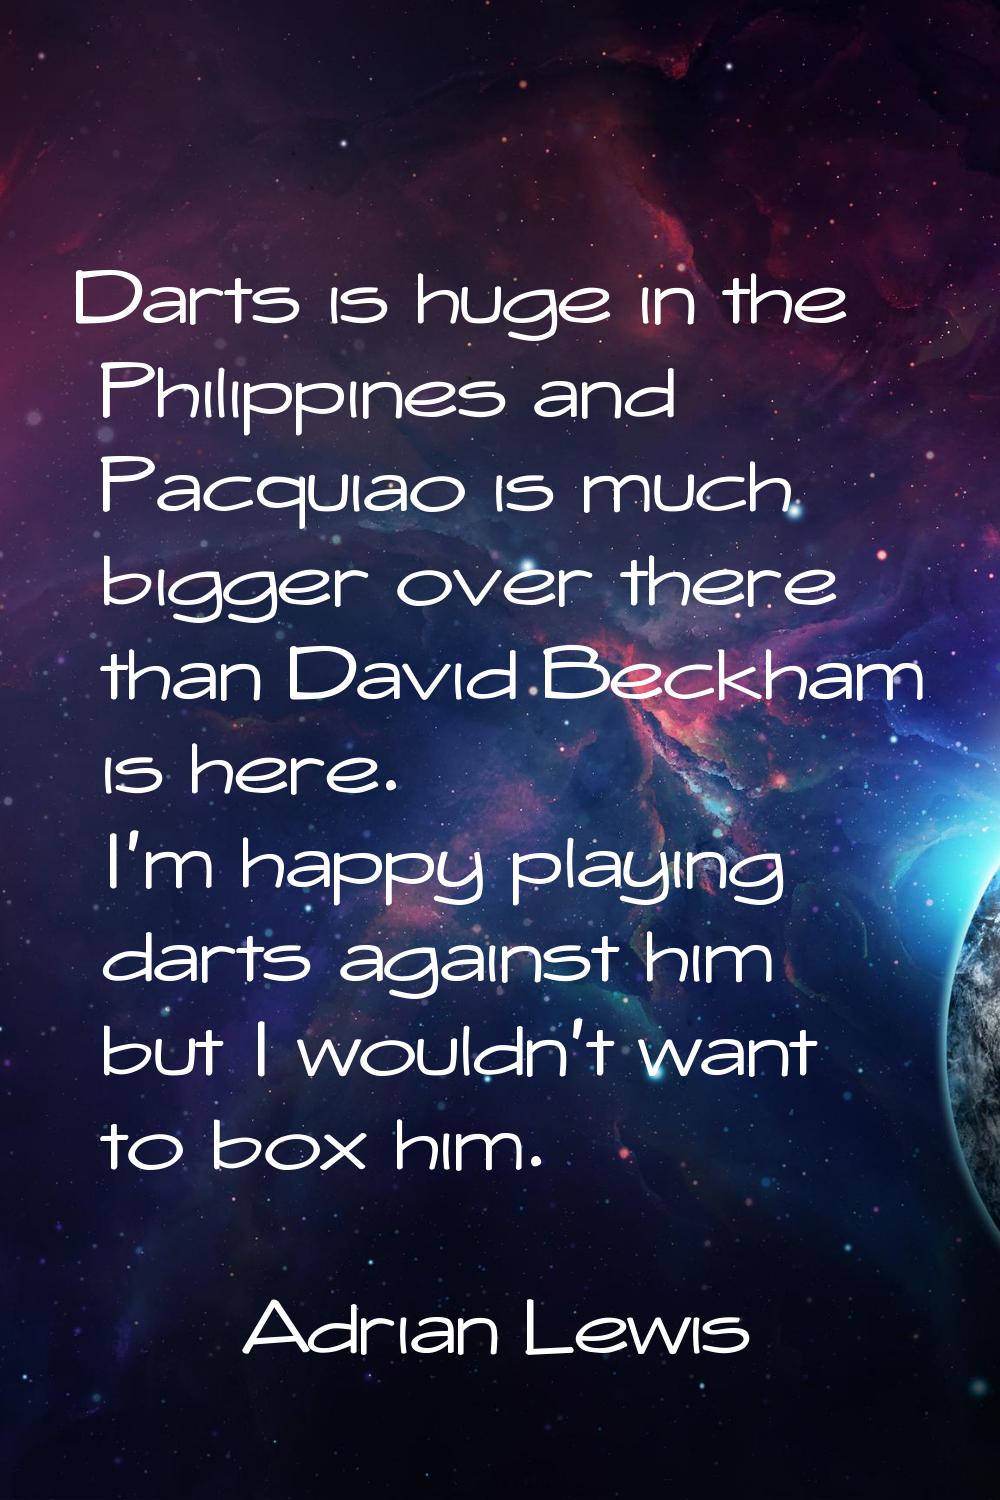 Darts is huge in the Philippines and Pacquiao is much bigger over there than David Beckham is here.